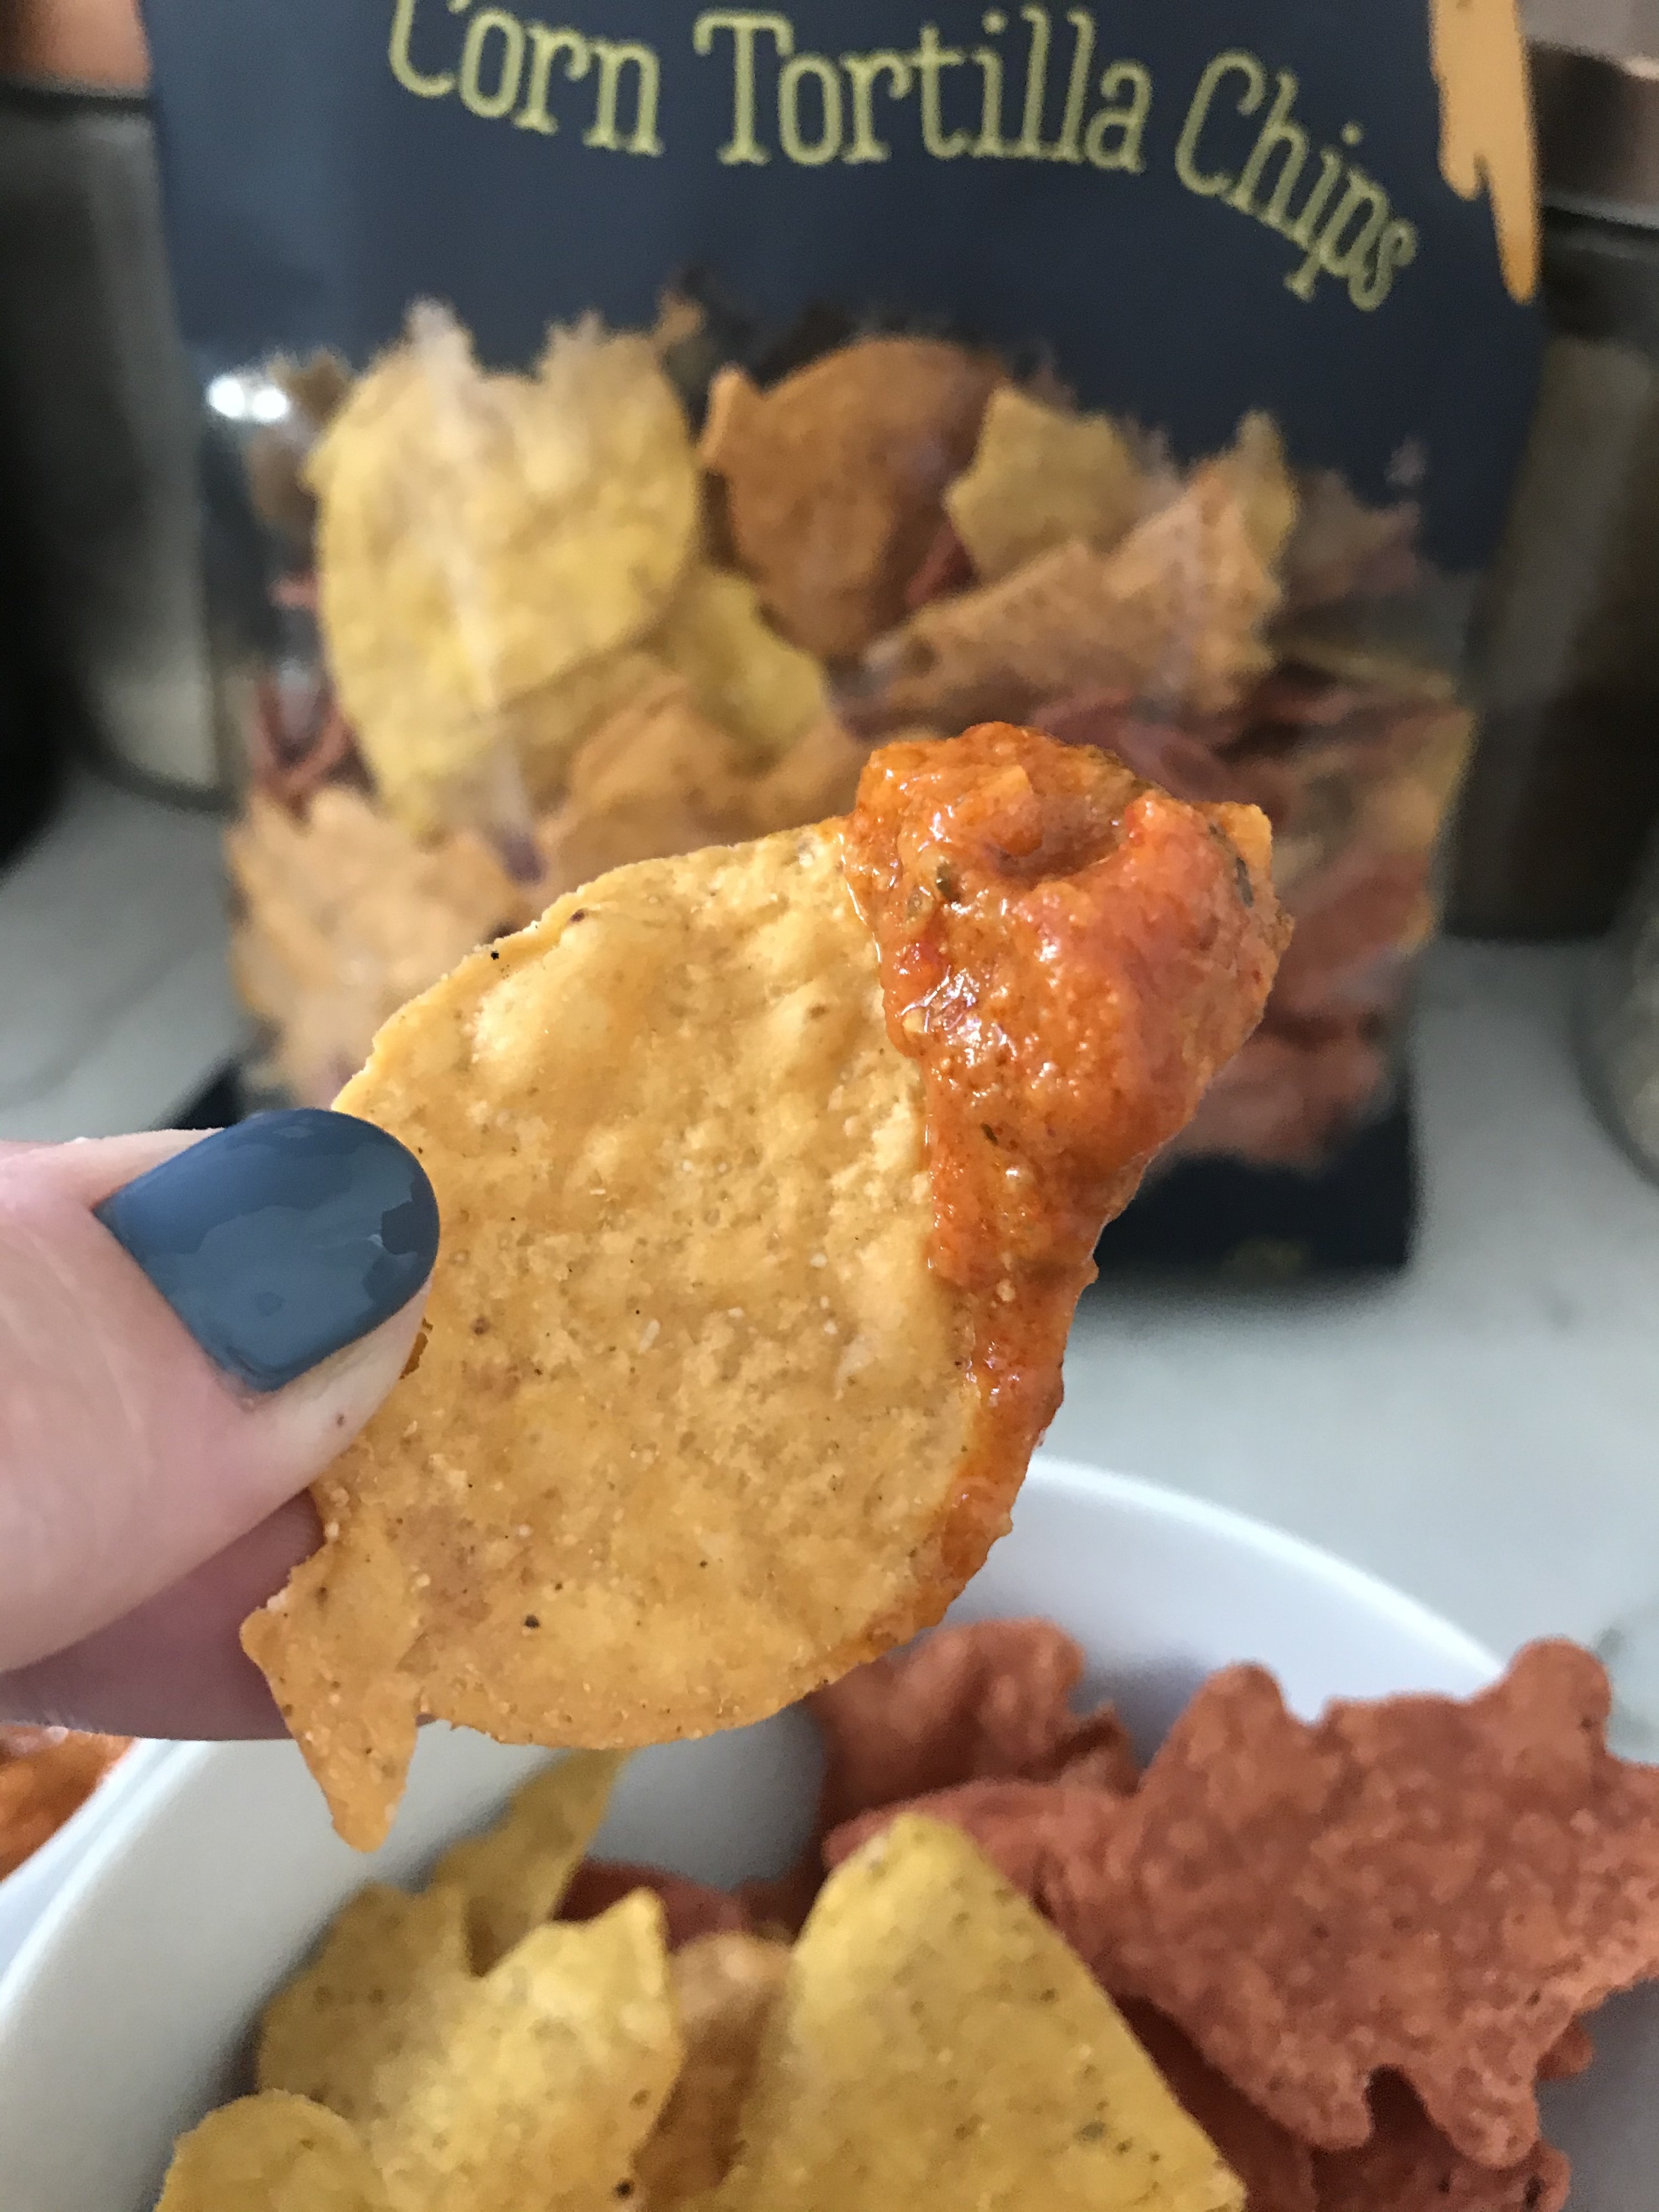 A finger holds up a leaf-shaped tortilla chip dipped in a creamy red salsa with the bag of chips in the background